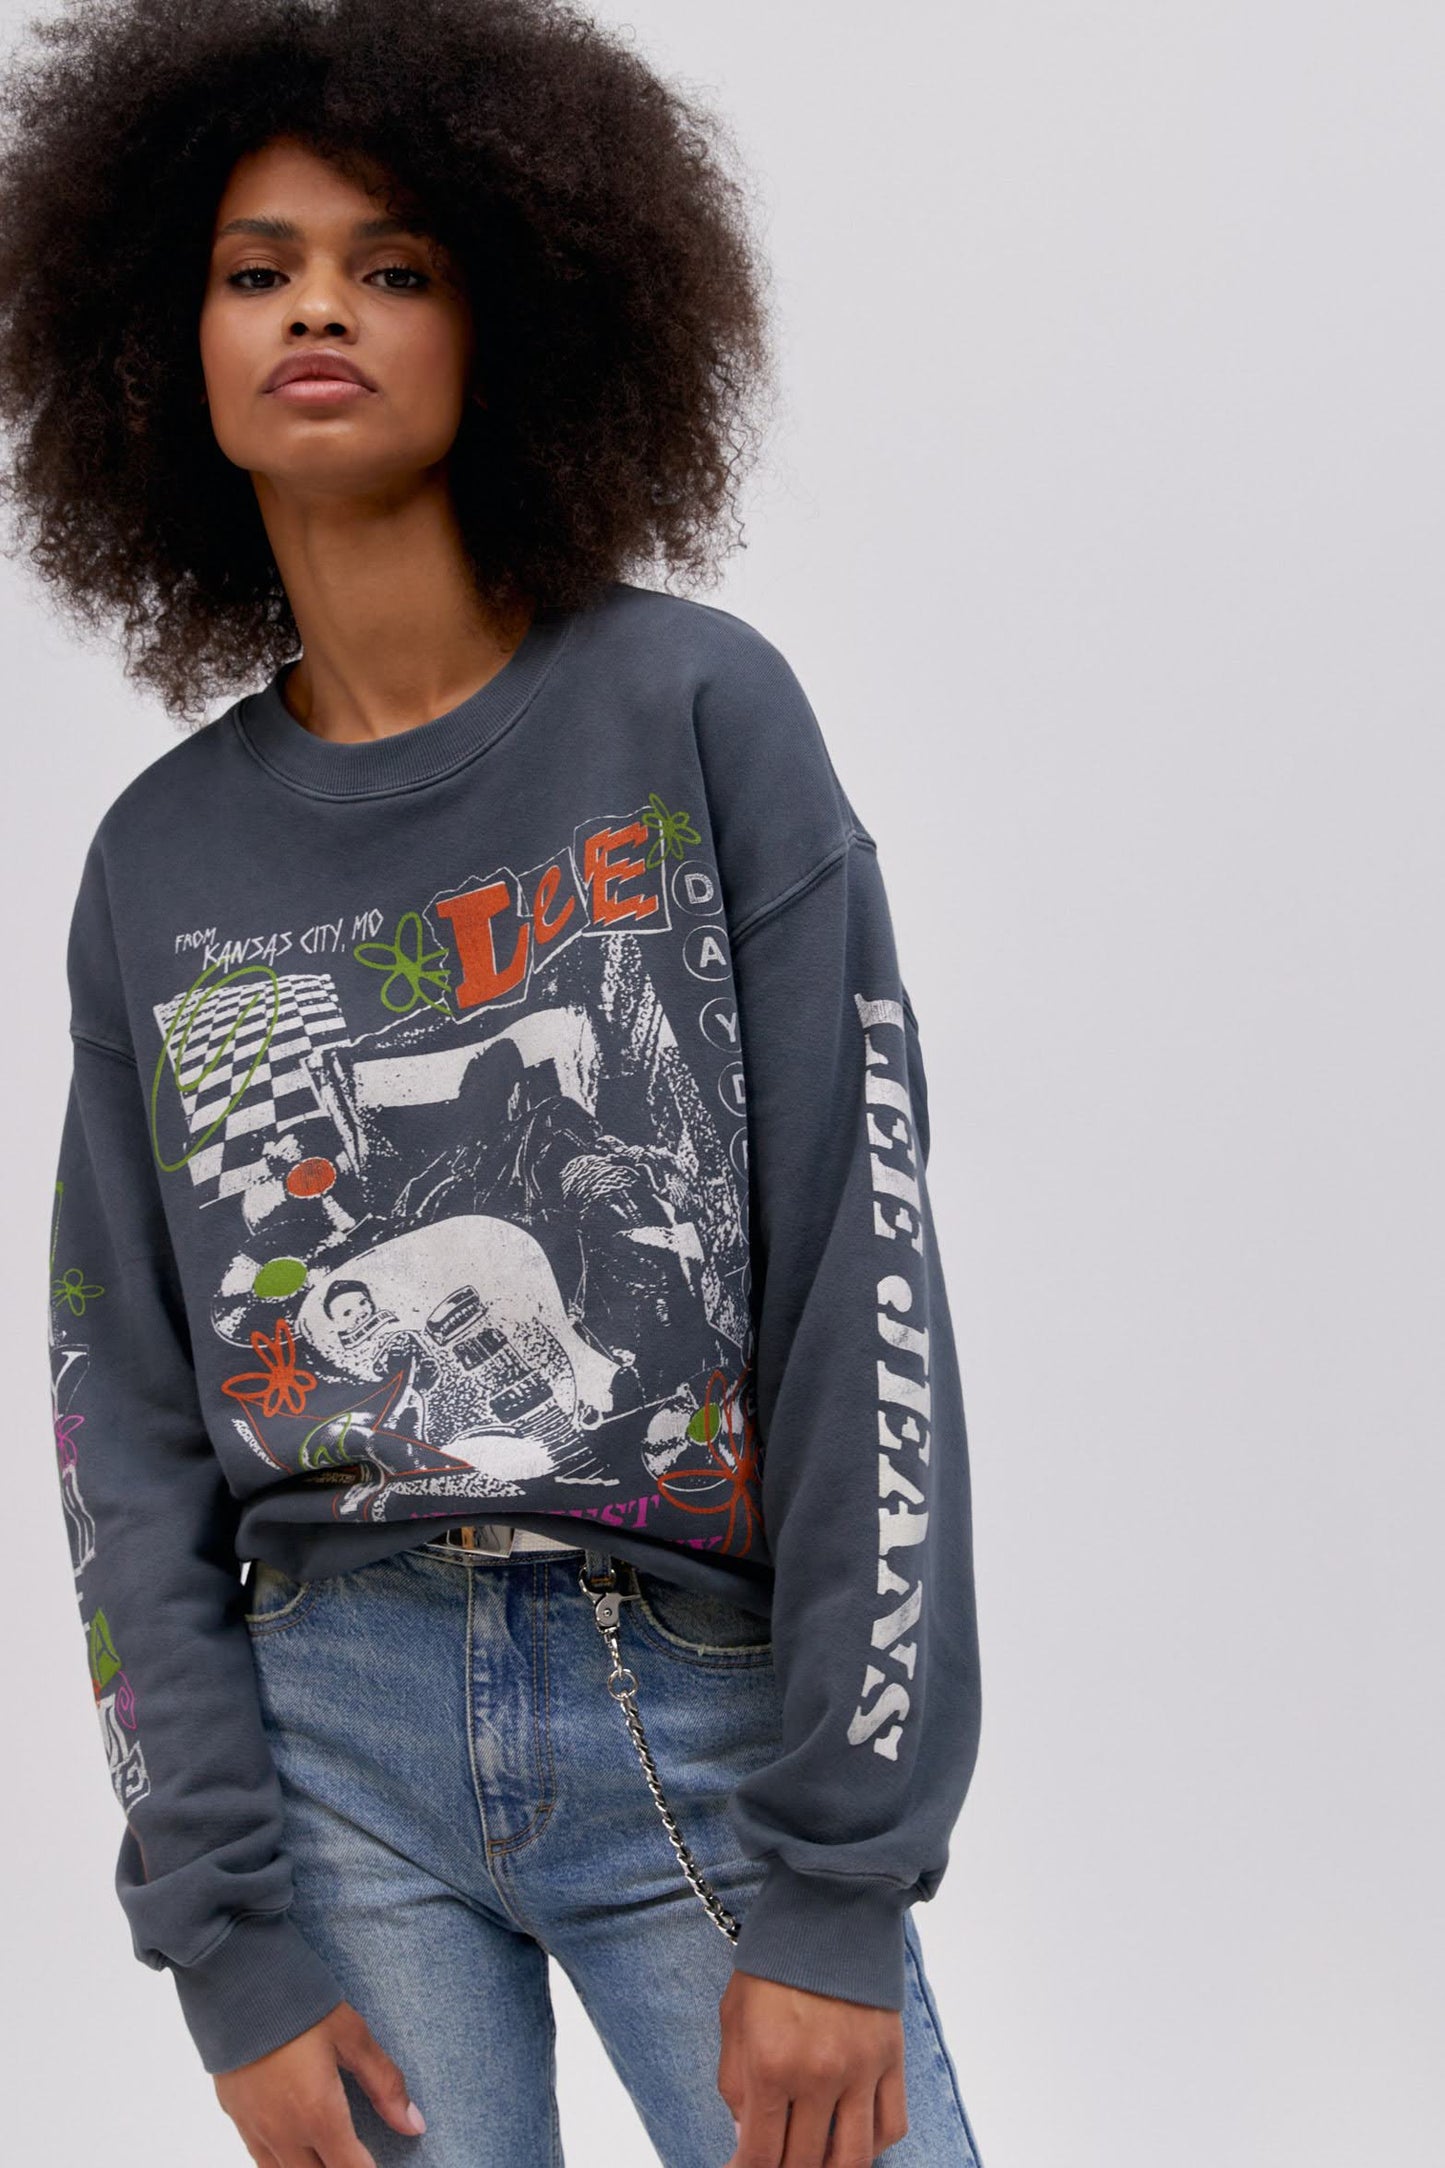 Curly haired model wearing a Lee x Daydreamer collab graphic sweatshirt in washed black.